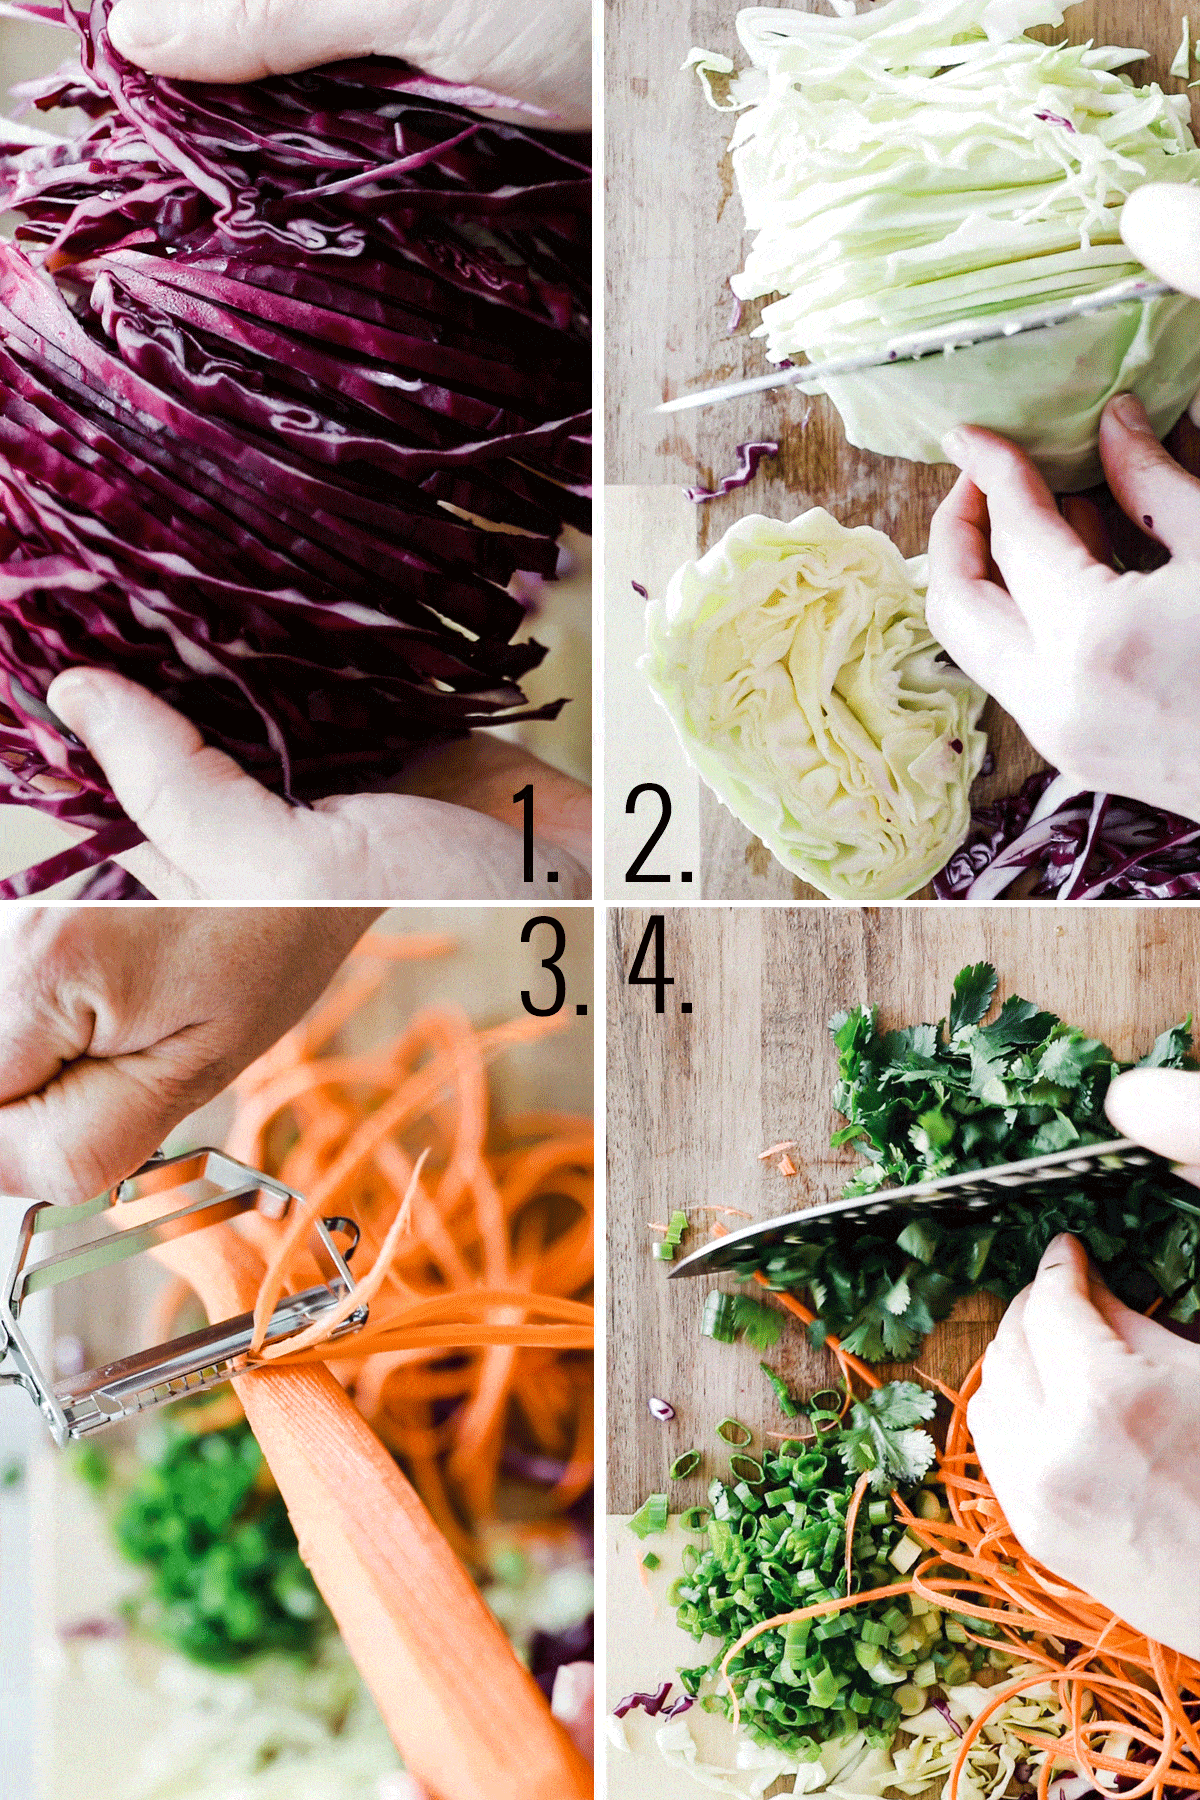 4 images showing how to cut various vegetables for slaw